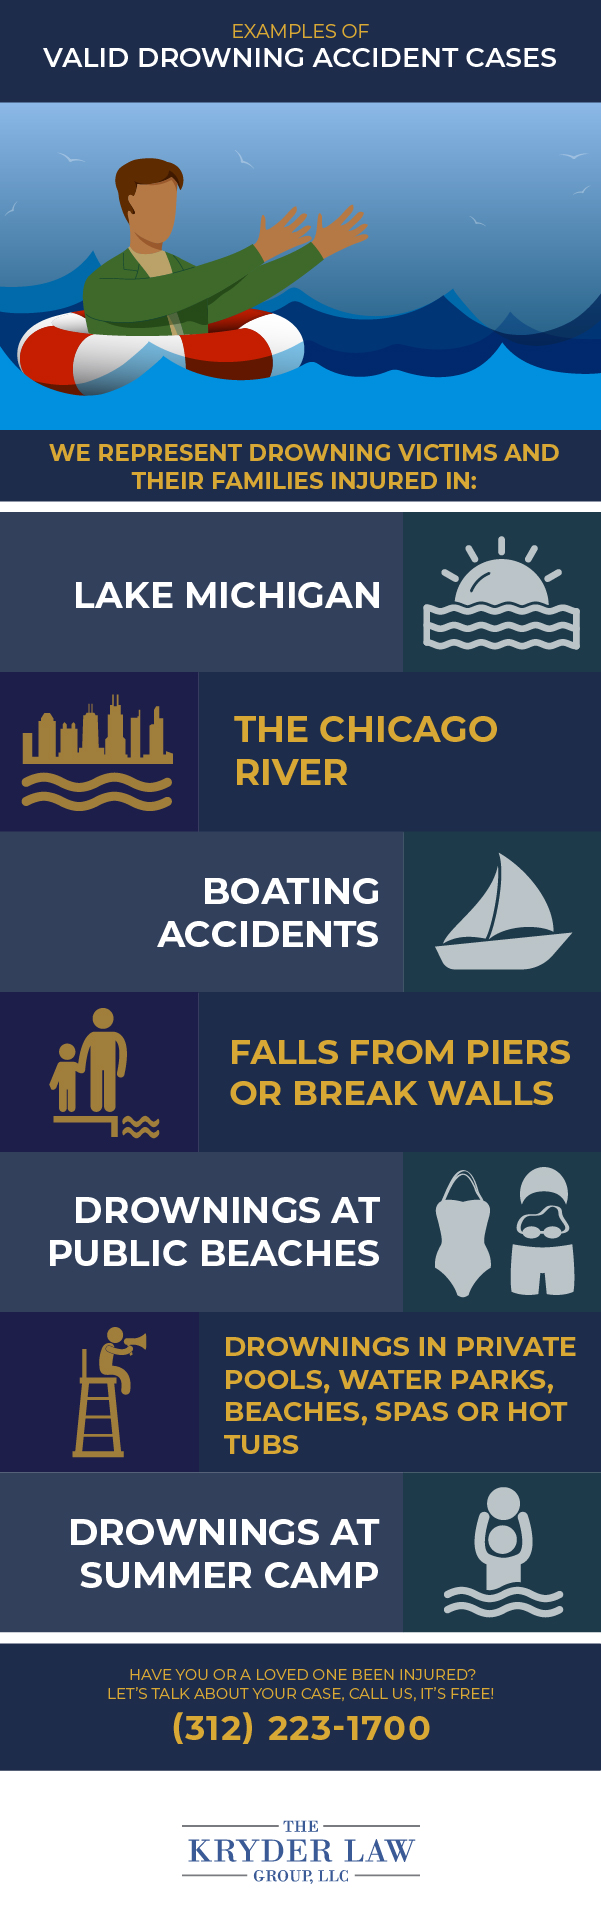 Examples of Valid Drowning Accident Cases Infographic